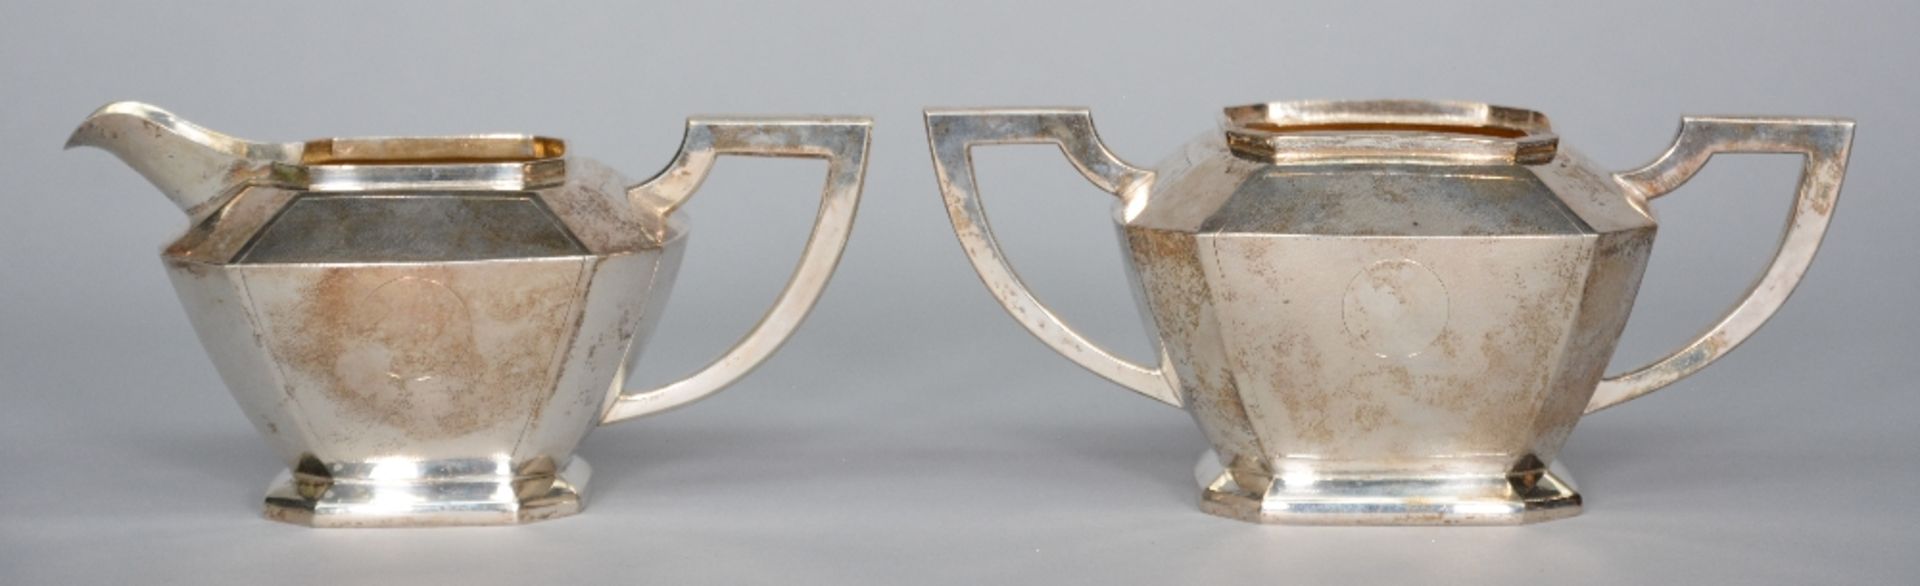 A Chinese silver three-piece tea set (925/100), H 16 - W 28 cm - Total weight: ca. 1123 g - Image 3 of 14